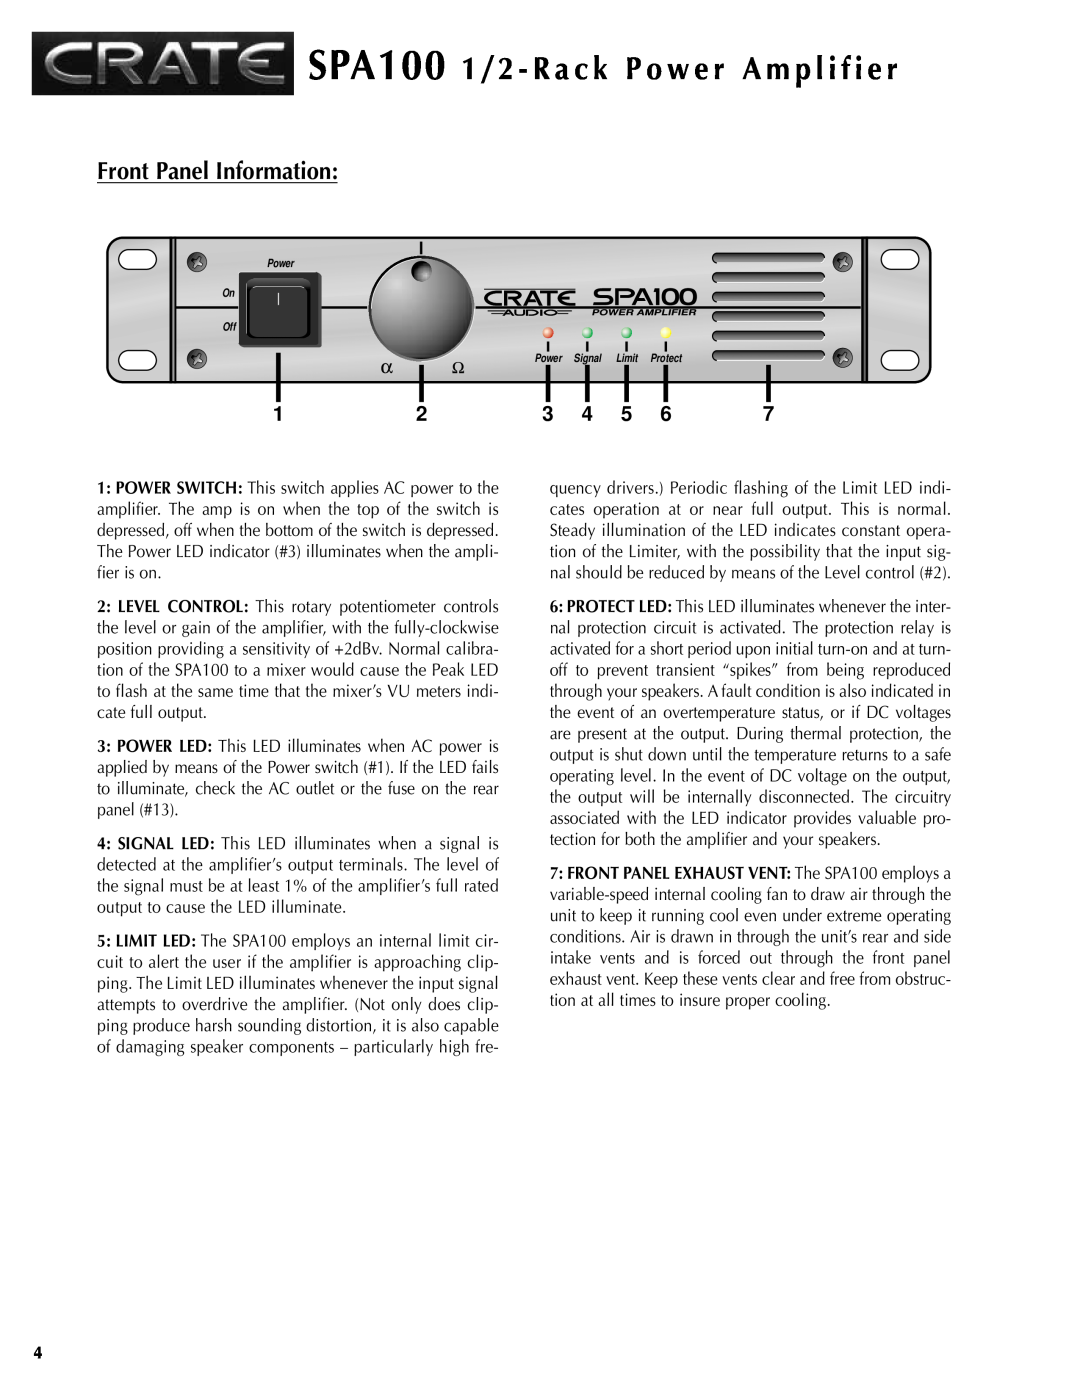 Crate Amplifiers SPA100 manual Front Panel Information 